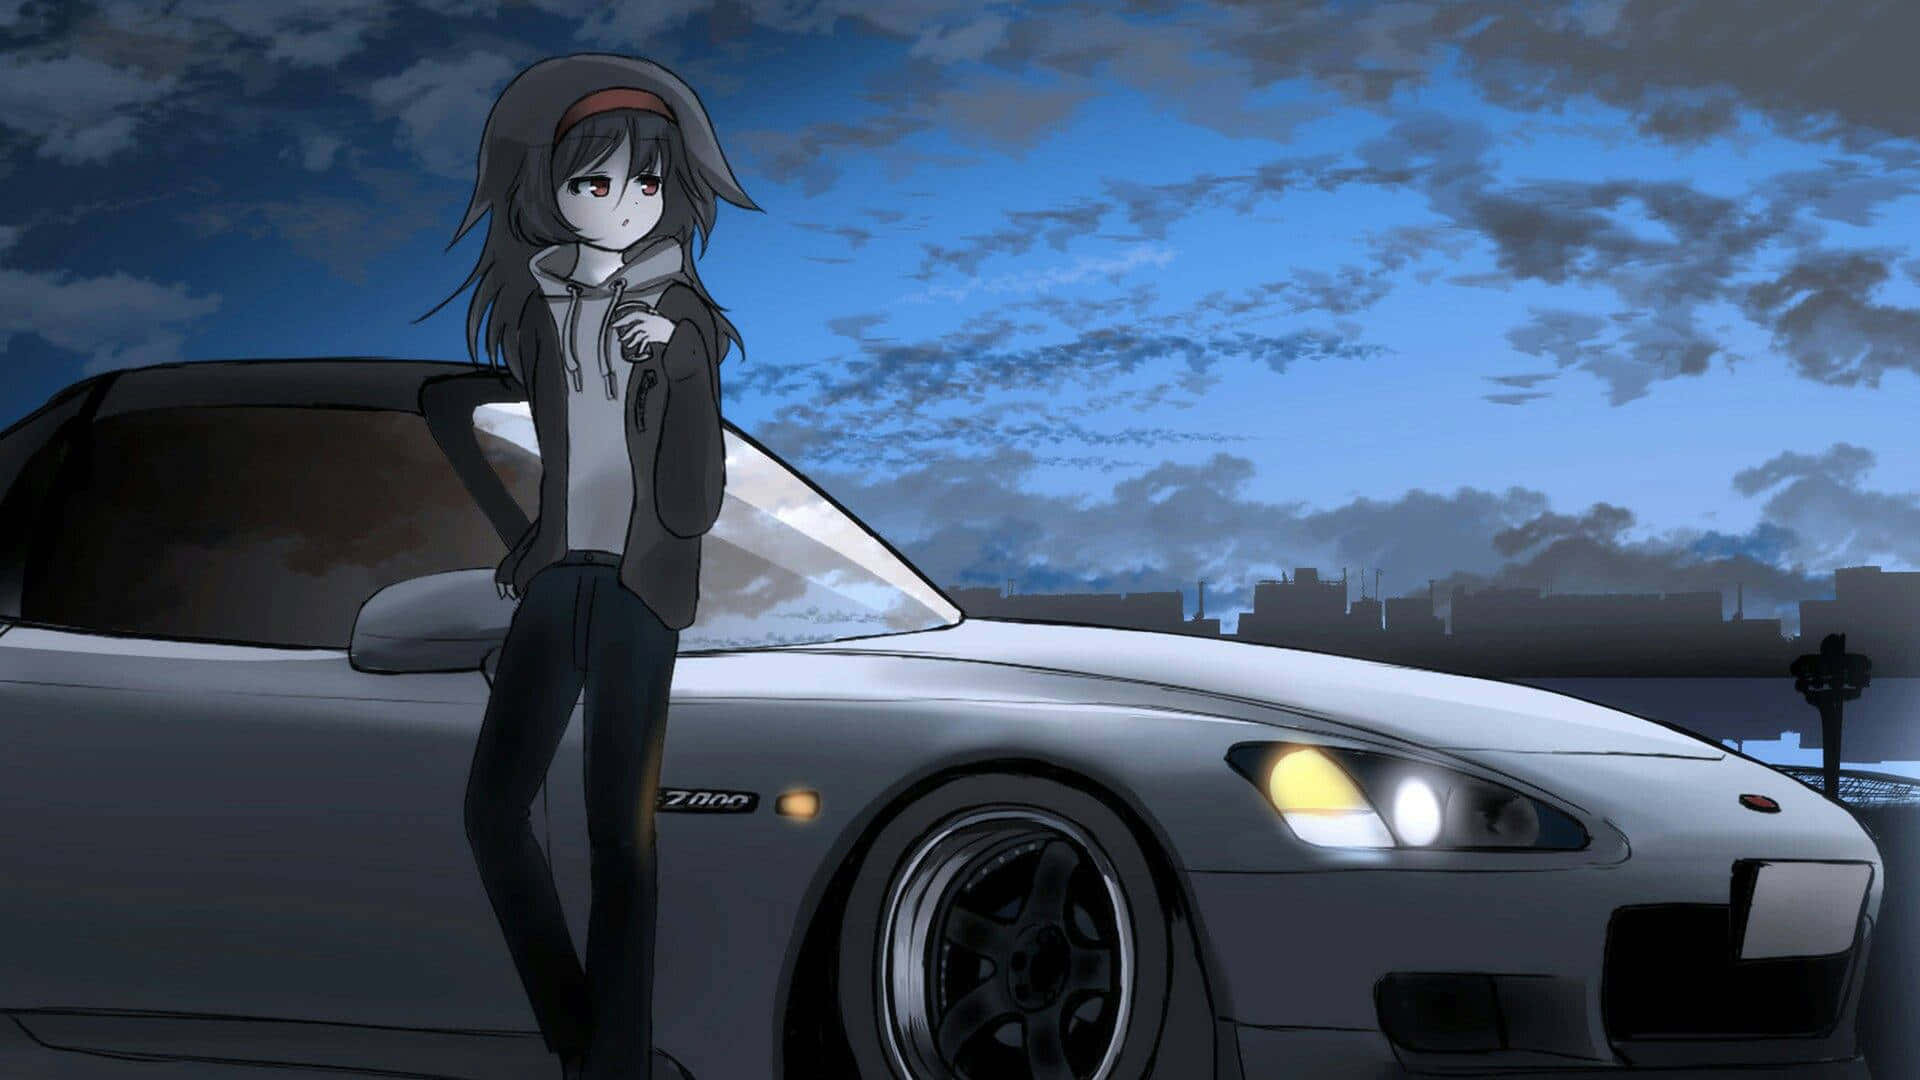 Explore the boundless possibilities in Anime with the Anime Car